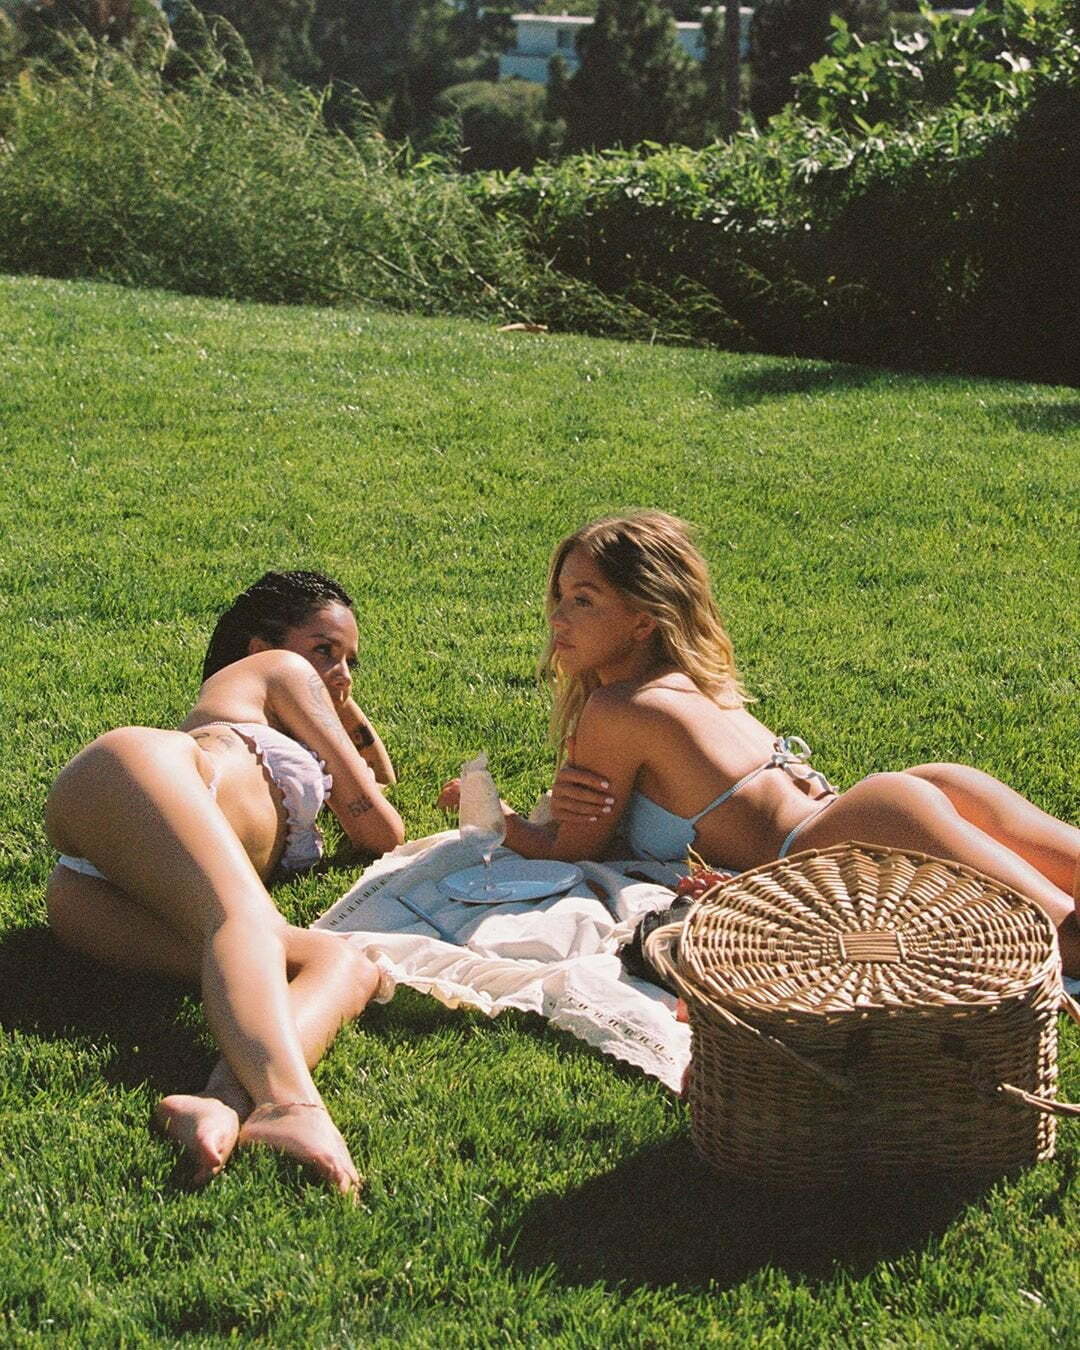 Halsey and Sydney Sweeney would be an out of this world threesome